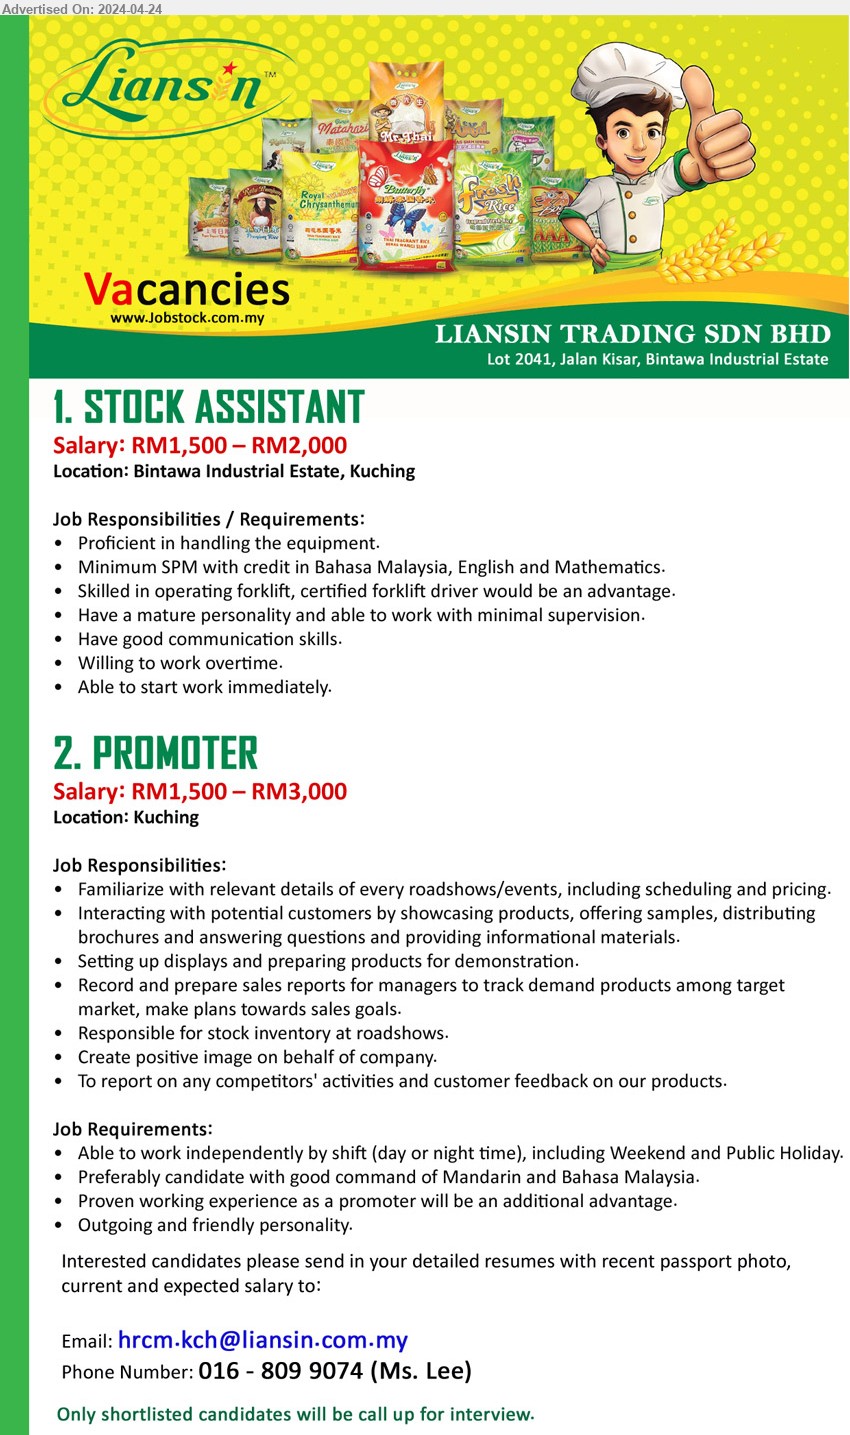 LIANSIN TRADING SDN BHD - 1. STOCK ASSISTANT (Kuching), RM1,500 – RM2,000, minimum SPM with credit in Bahasa Malaysia, English and Mathematics....
2. PROMOTER (Kuching), RM1,500 – RM3,000, Preferably candidate with good command of Mandarin and Bahasa Malaysia....
Call 016-8099074  / Email resume to ...